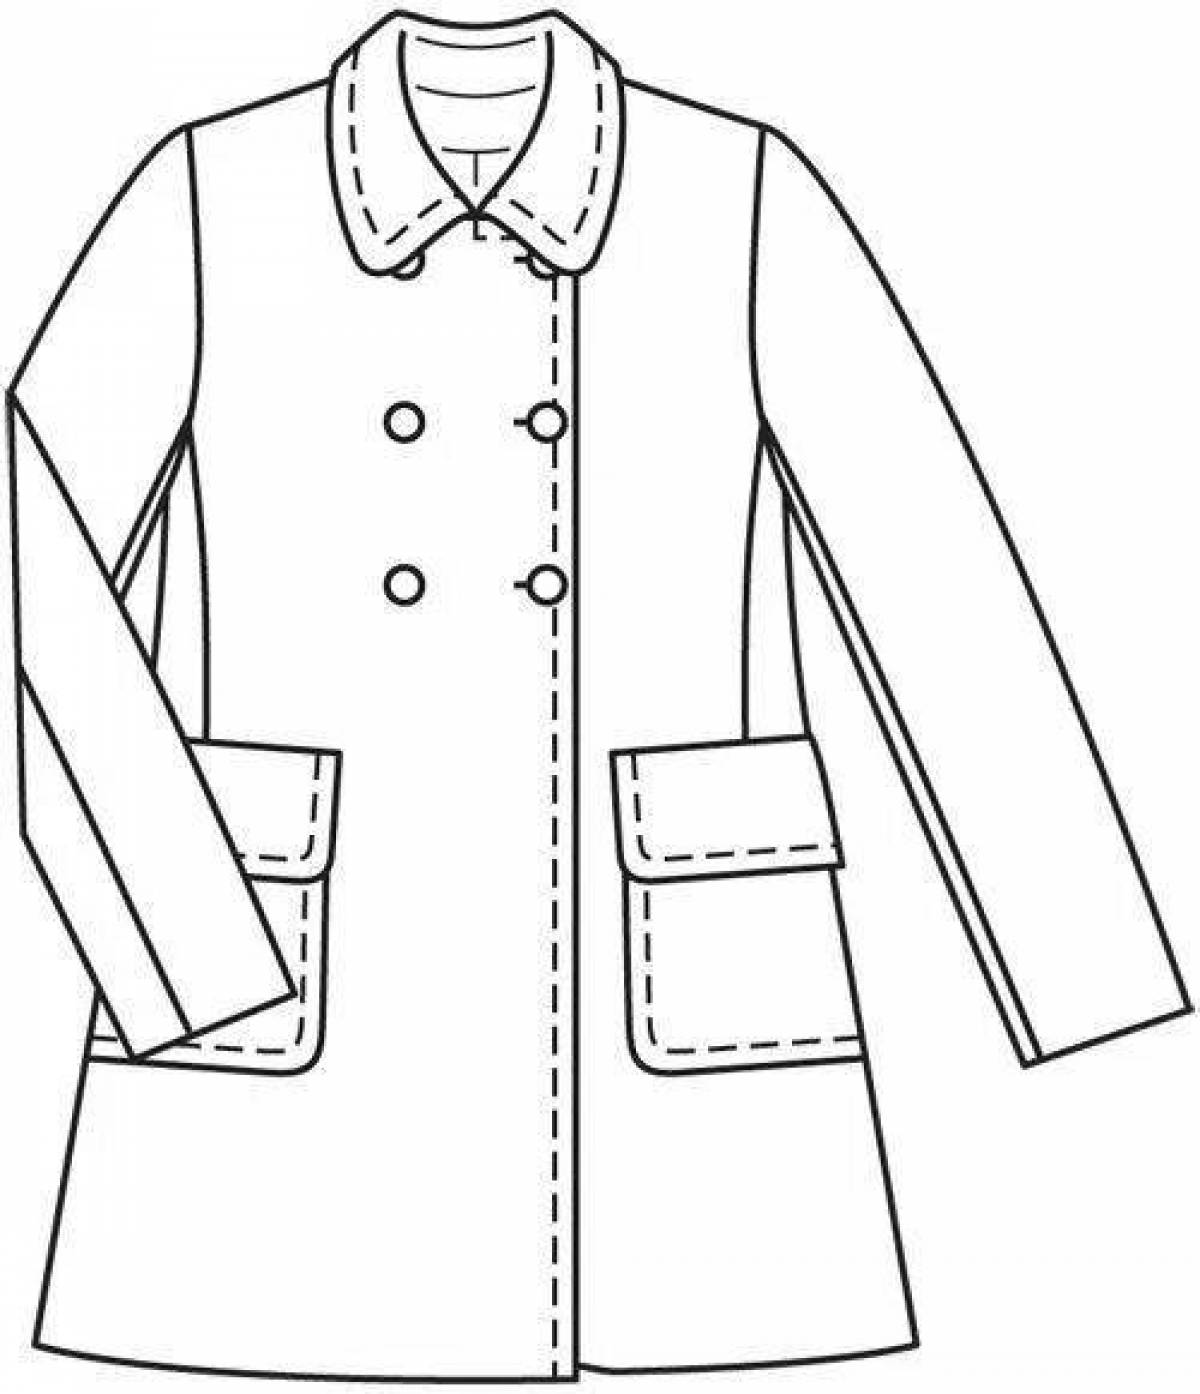 Coloring page of a spectacular coat for children